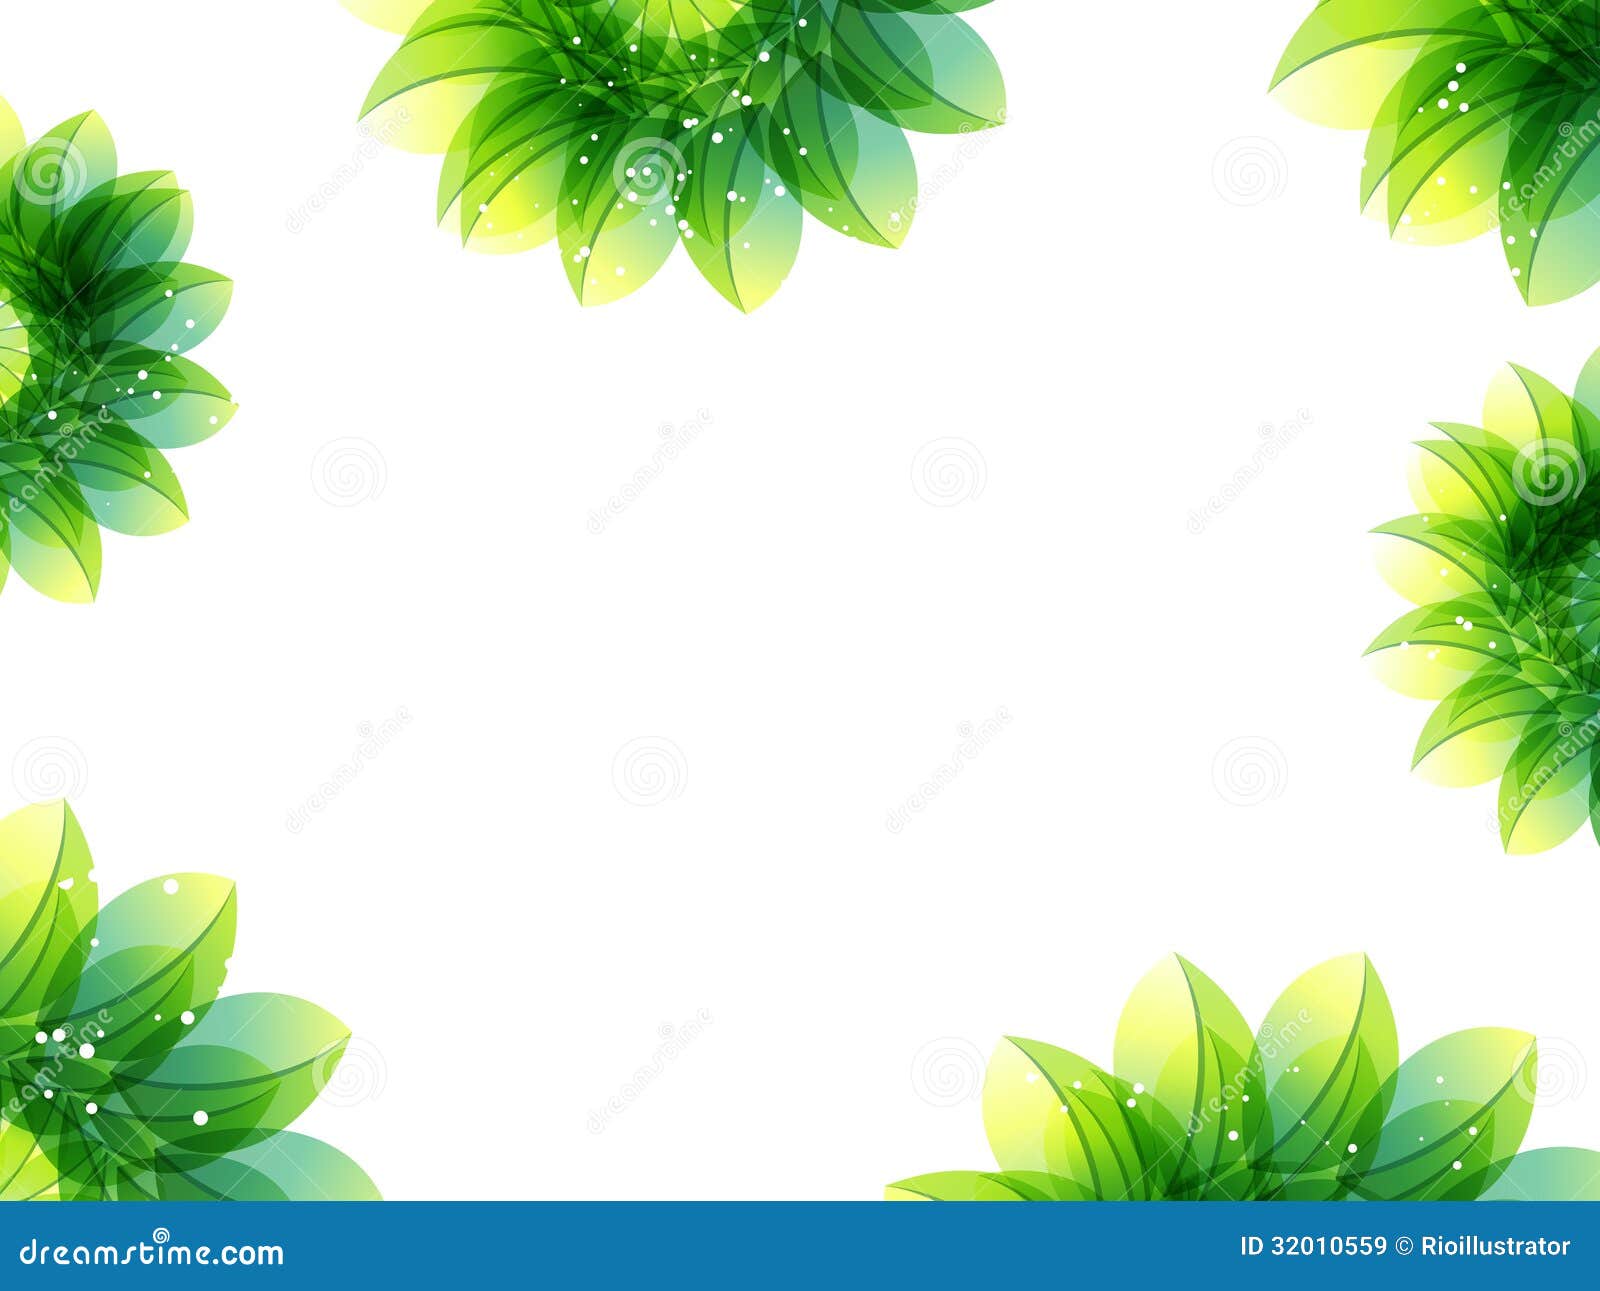 Abstract Green Flower Background Stock Vector - Illustration of decoration,  curl: 32010559